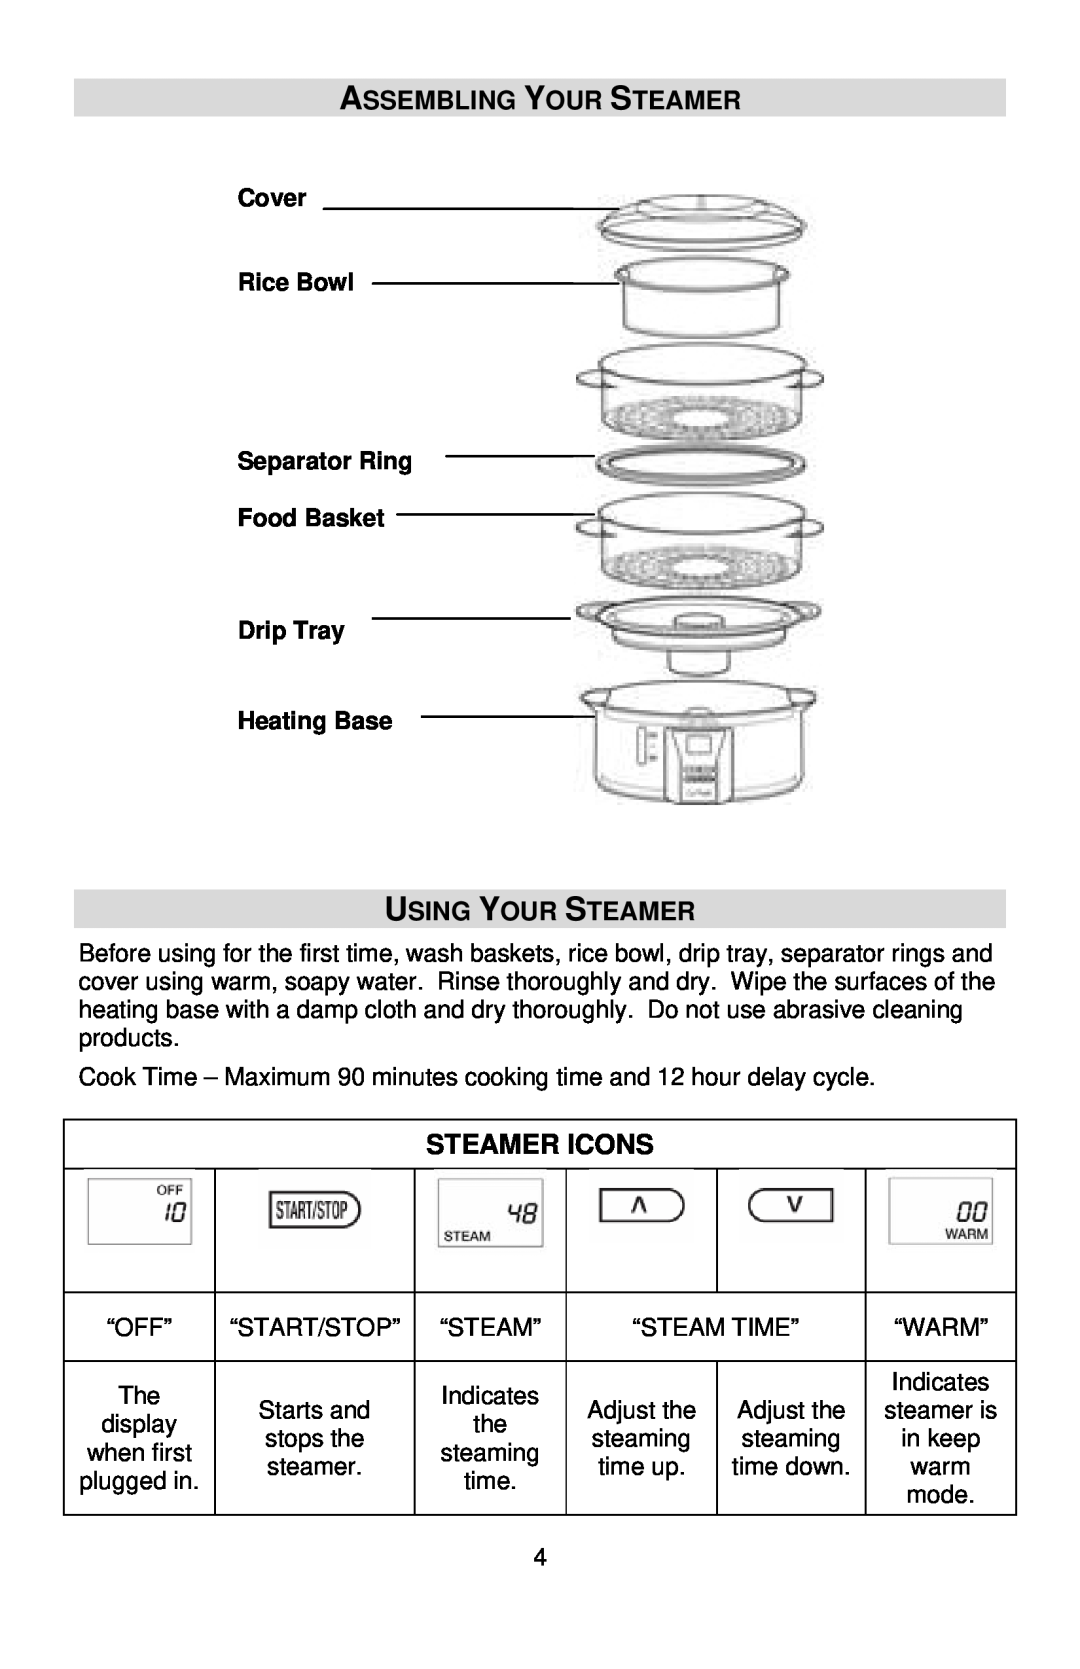 West Bend L5765 Assembling Your Steamer, Using Your Steamer, Steamer Icons, Cover Rice Bowl Separator Ring Food Basket 